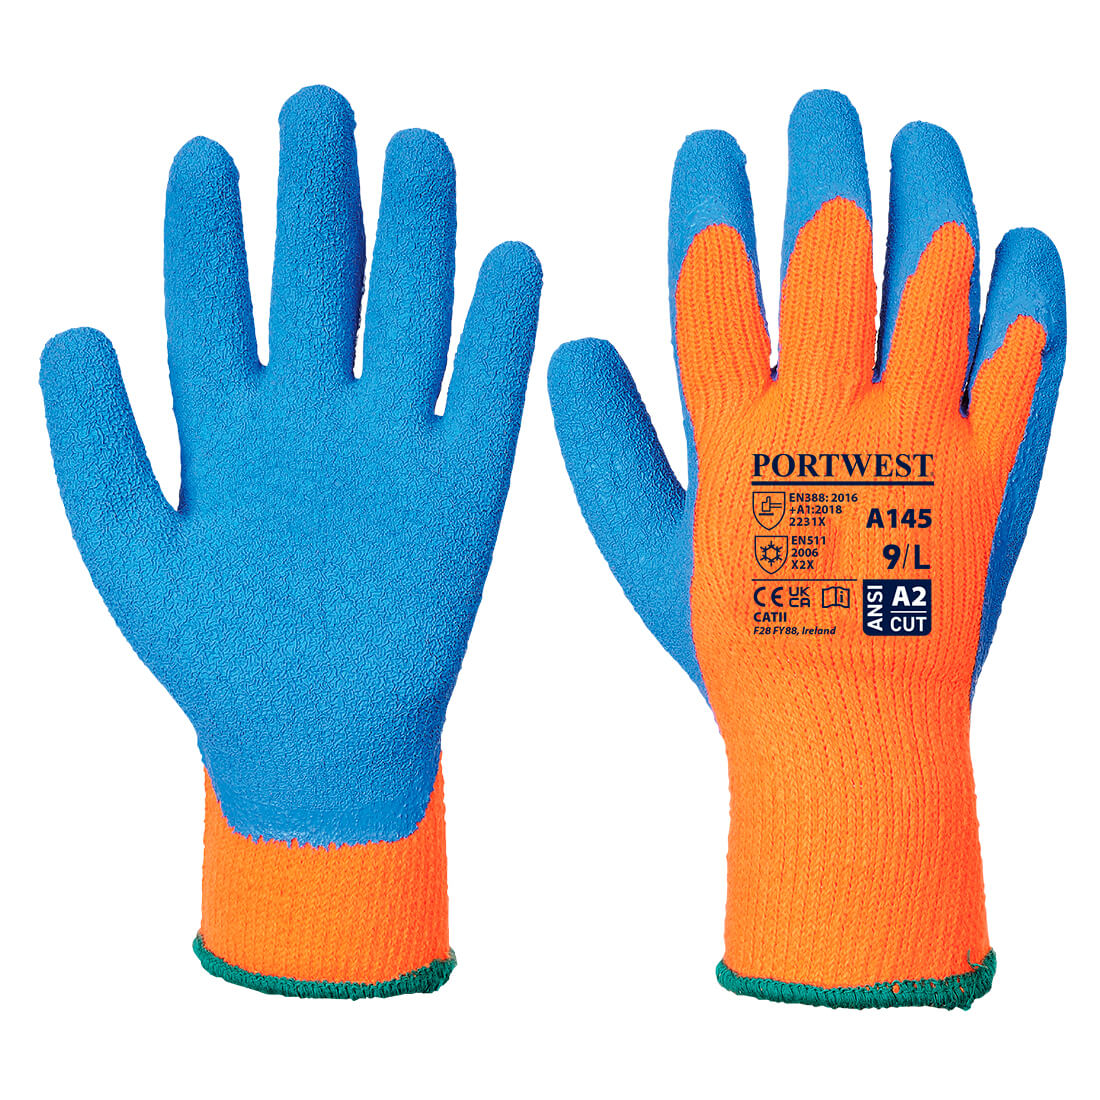 HAND PROTECTION, Thermal Gloves